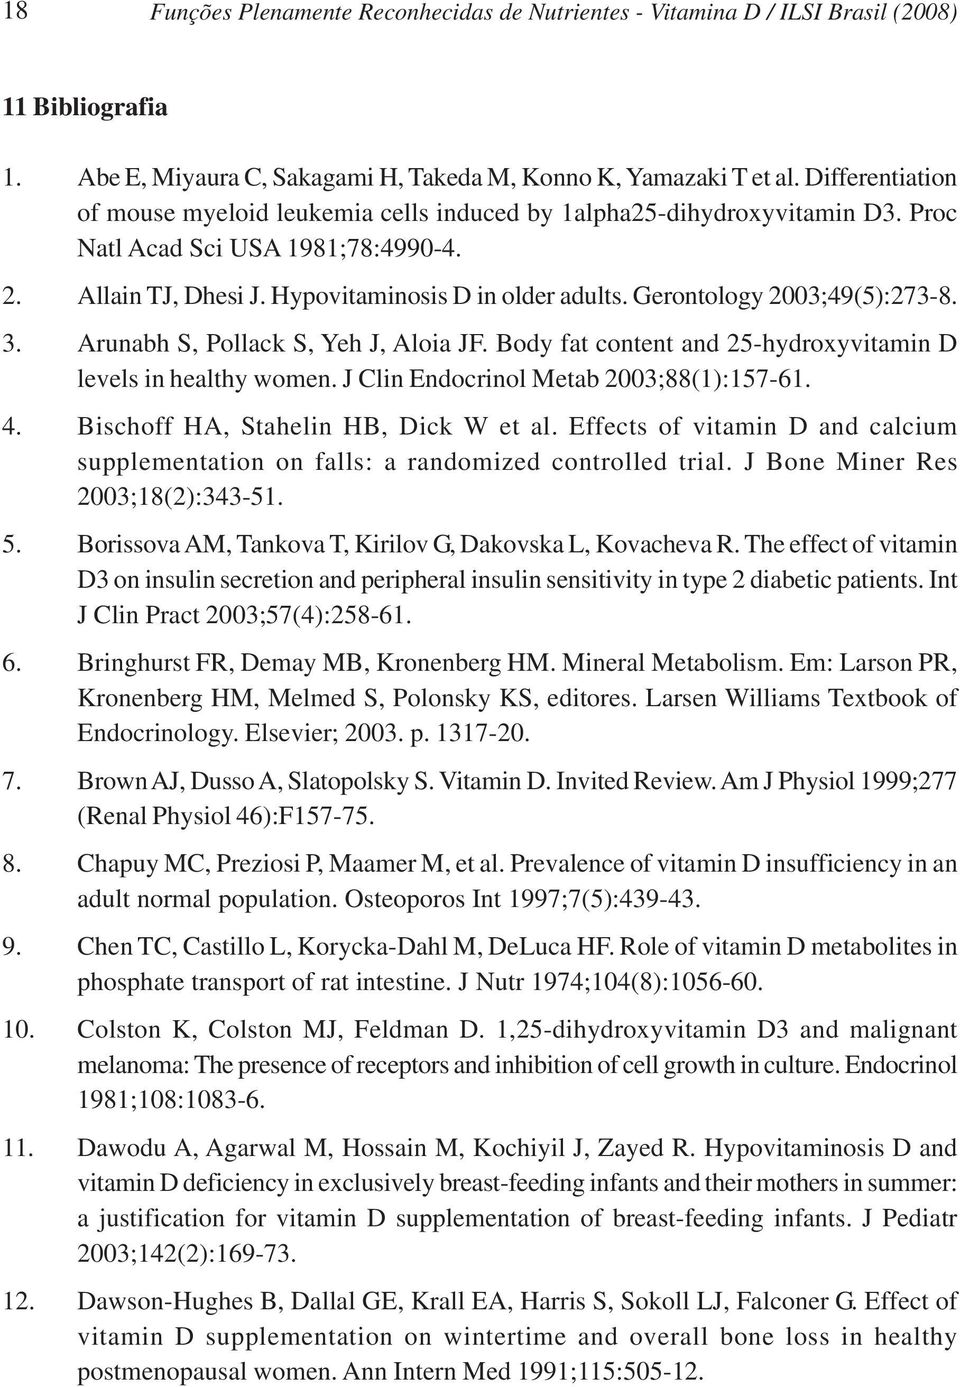 Gerontology 2003;49(5):273-8. 3. Arunabh S, Pollack S, Yeh J, Aloia JF. Body fat content and 25-hydroxyvitamin D levels in healthy women. J Clin Endocrinol Metab 2003;88(1):157-61. 4.